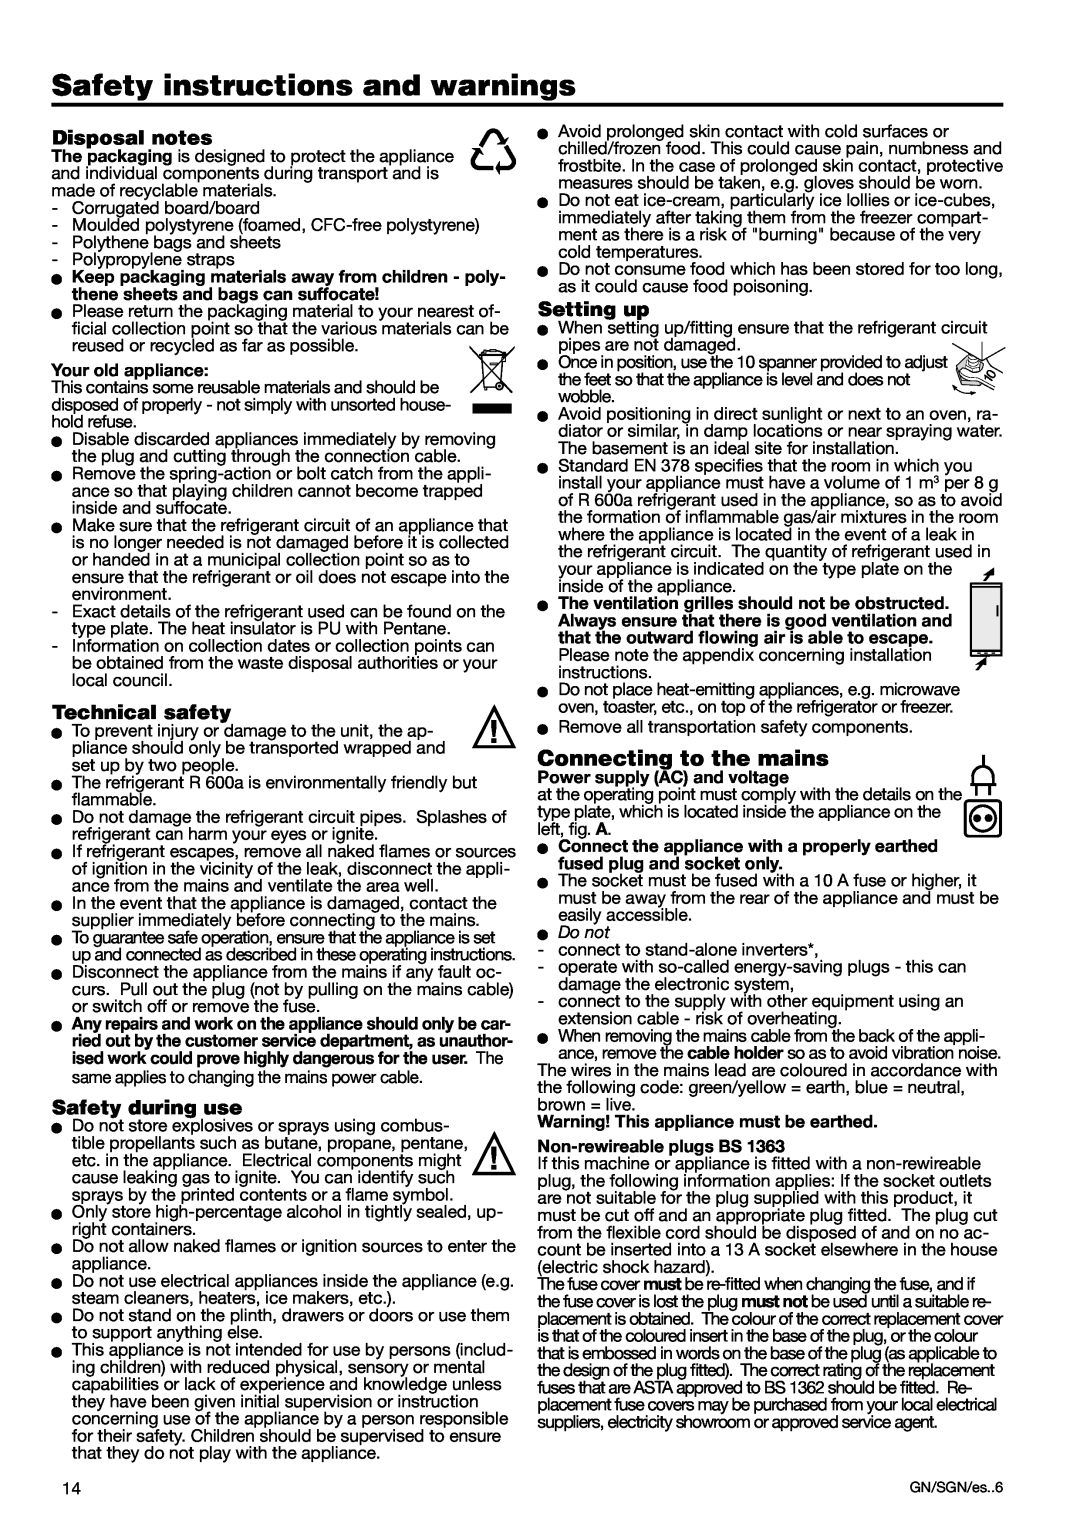 Liebherr 7082 300-03 Safety instructions and warnings, Connecting to the mains, Disposal notes, Technical safety, WDo not 